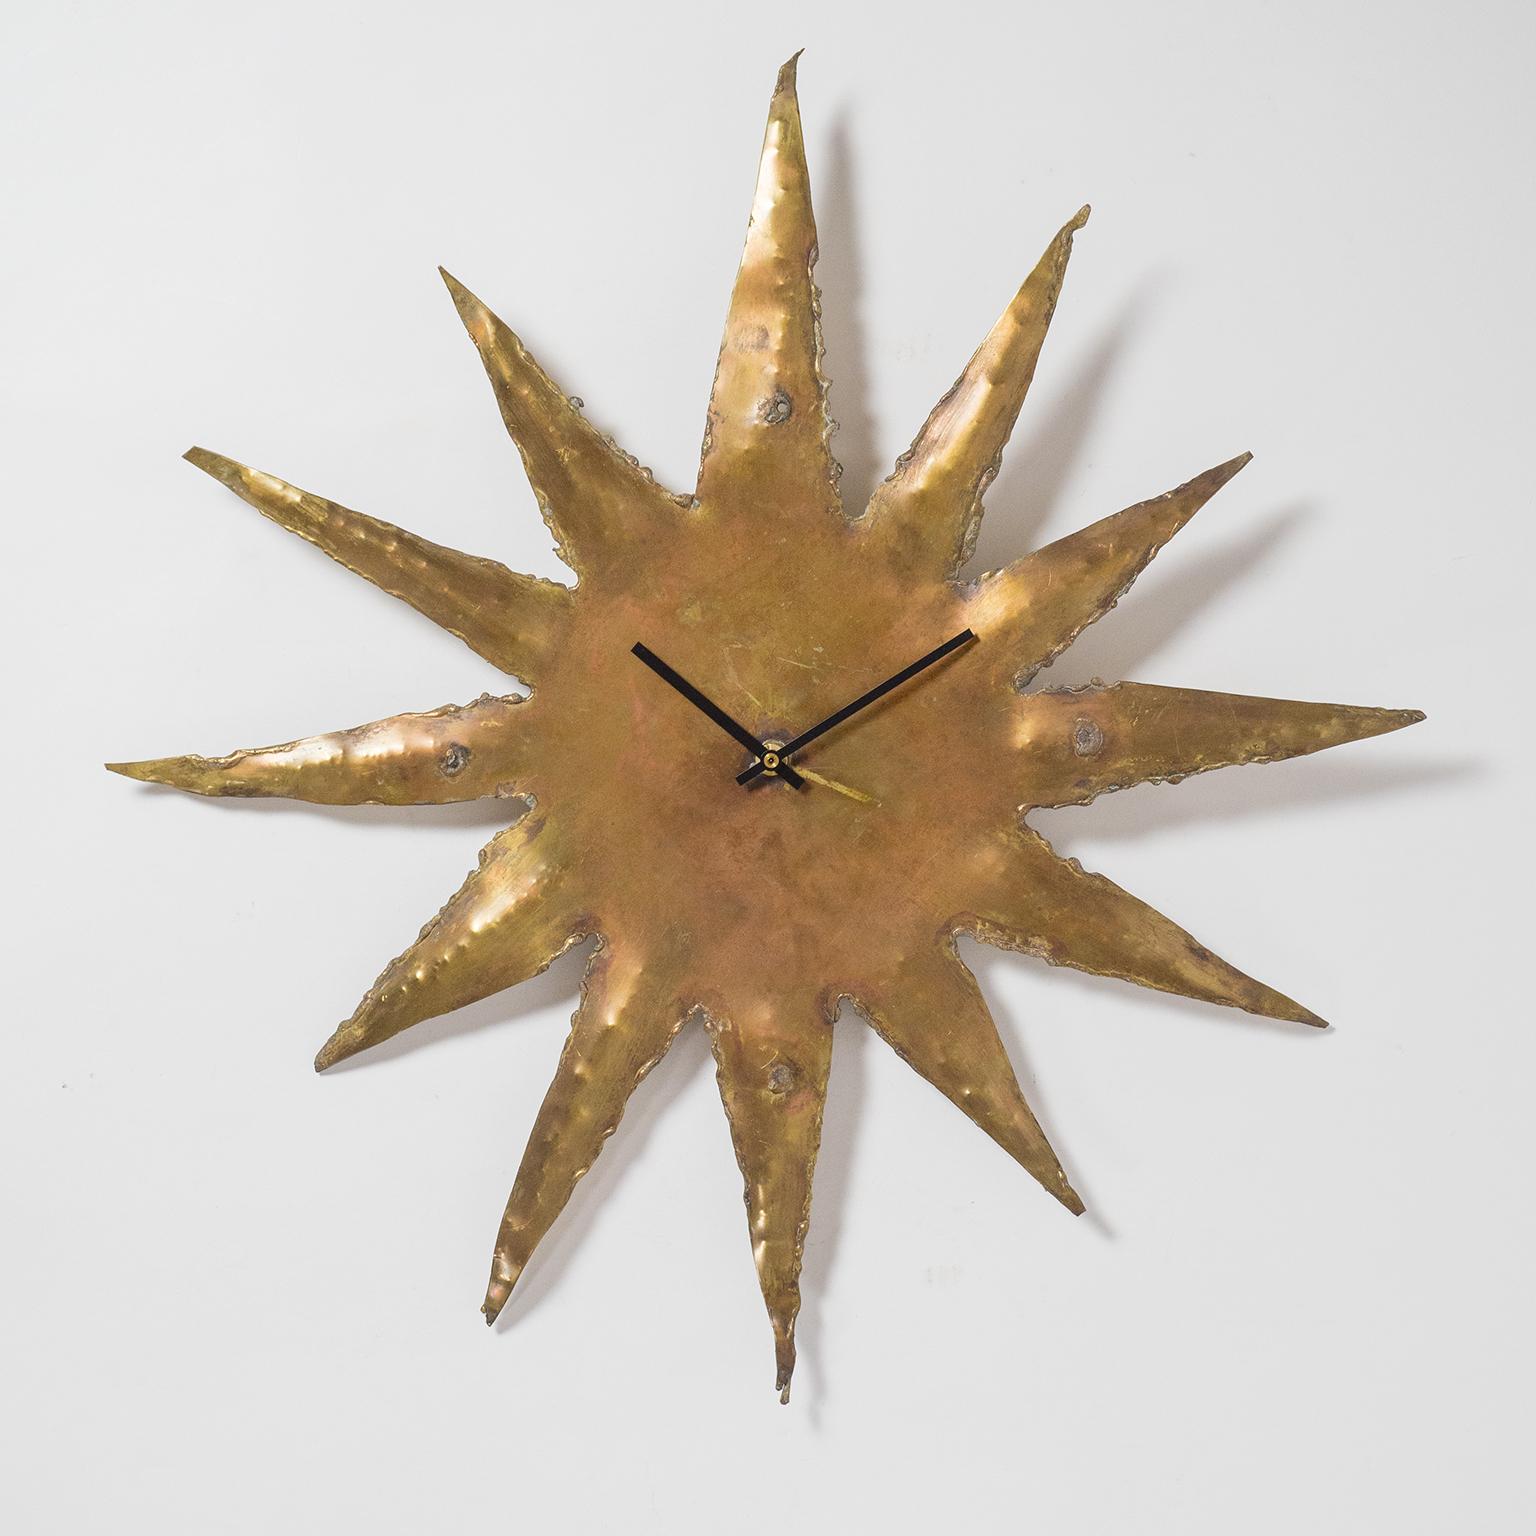 Very unique French torch-cut Brutalist brass wall clock from the 1970s. Made from a single sheet of brass this one of a kind clock exudes a very gritty sculptural quality. The brass has developed a lovely patina over the years. The battery-powered